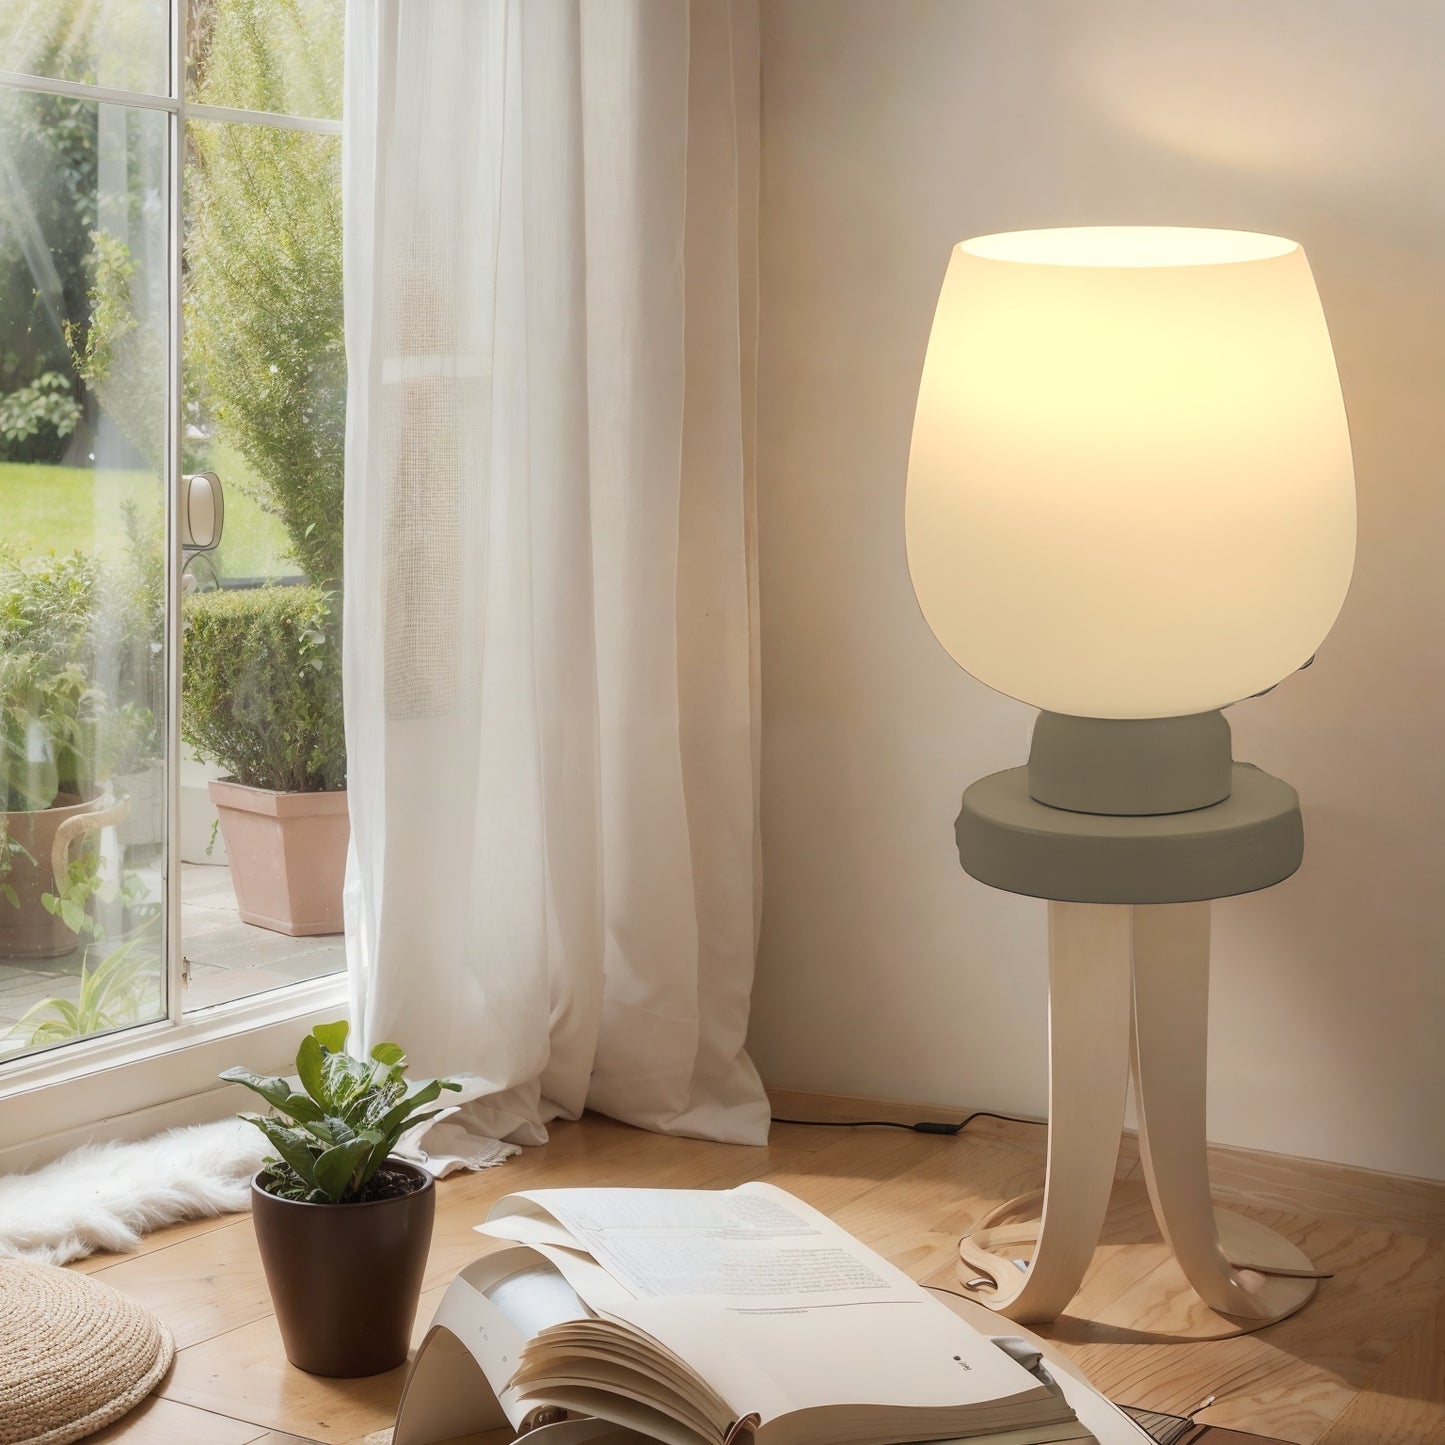 Bedroom Touch Bedside Lamp with 2 USB Plugs and Adjustable Touch Control, Bedroom Study Decorative Nightlight with Opal Glass Lampshade